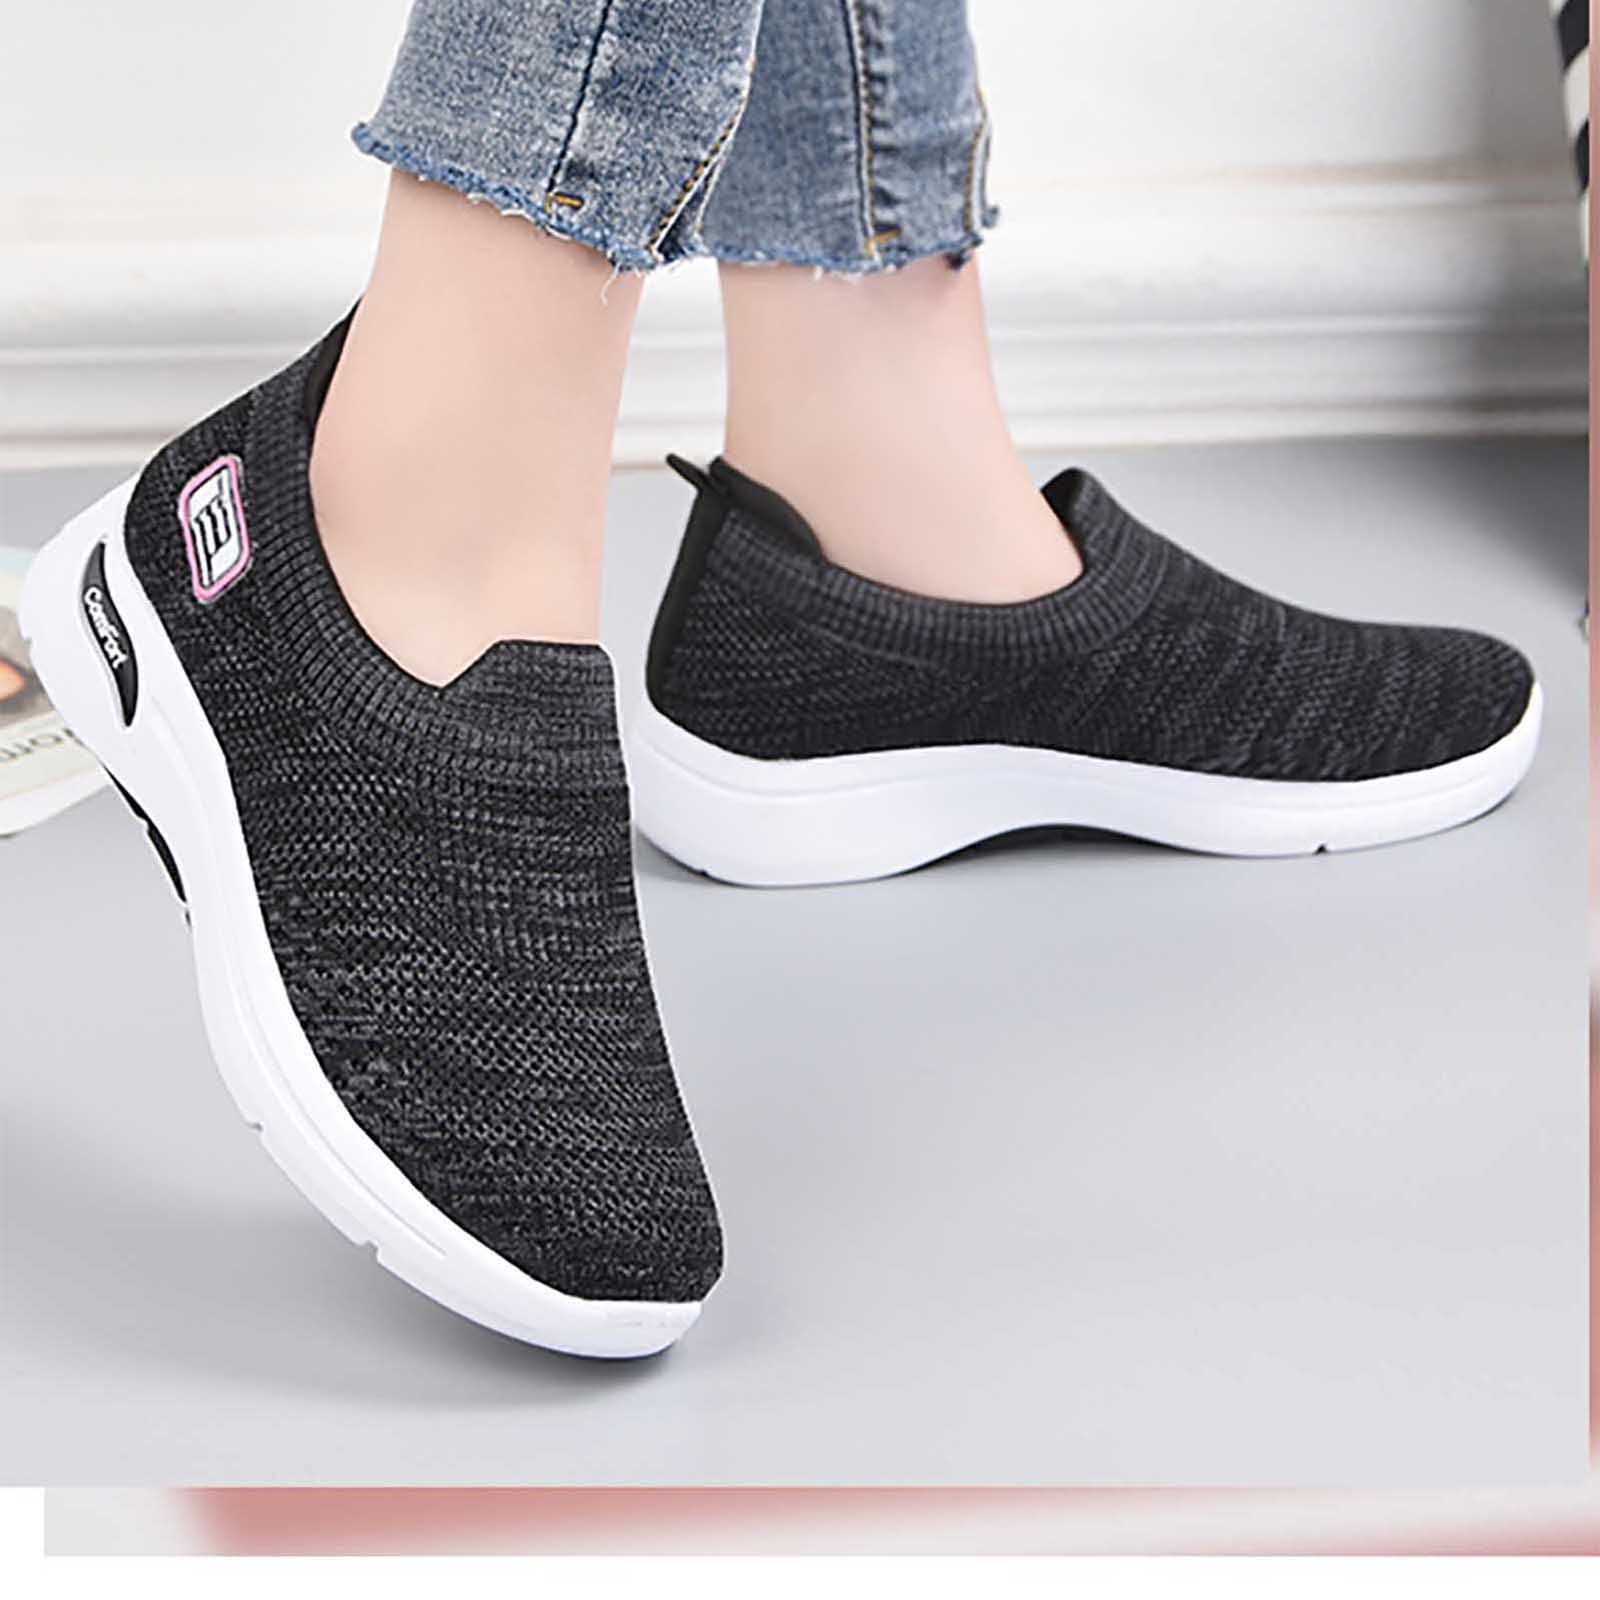 Fashion Women Shoe Soft-soled Comfortable Flying Woven Casual Ladies Shoes